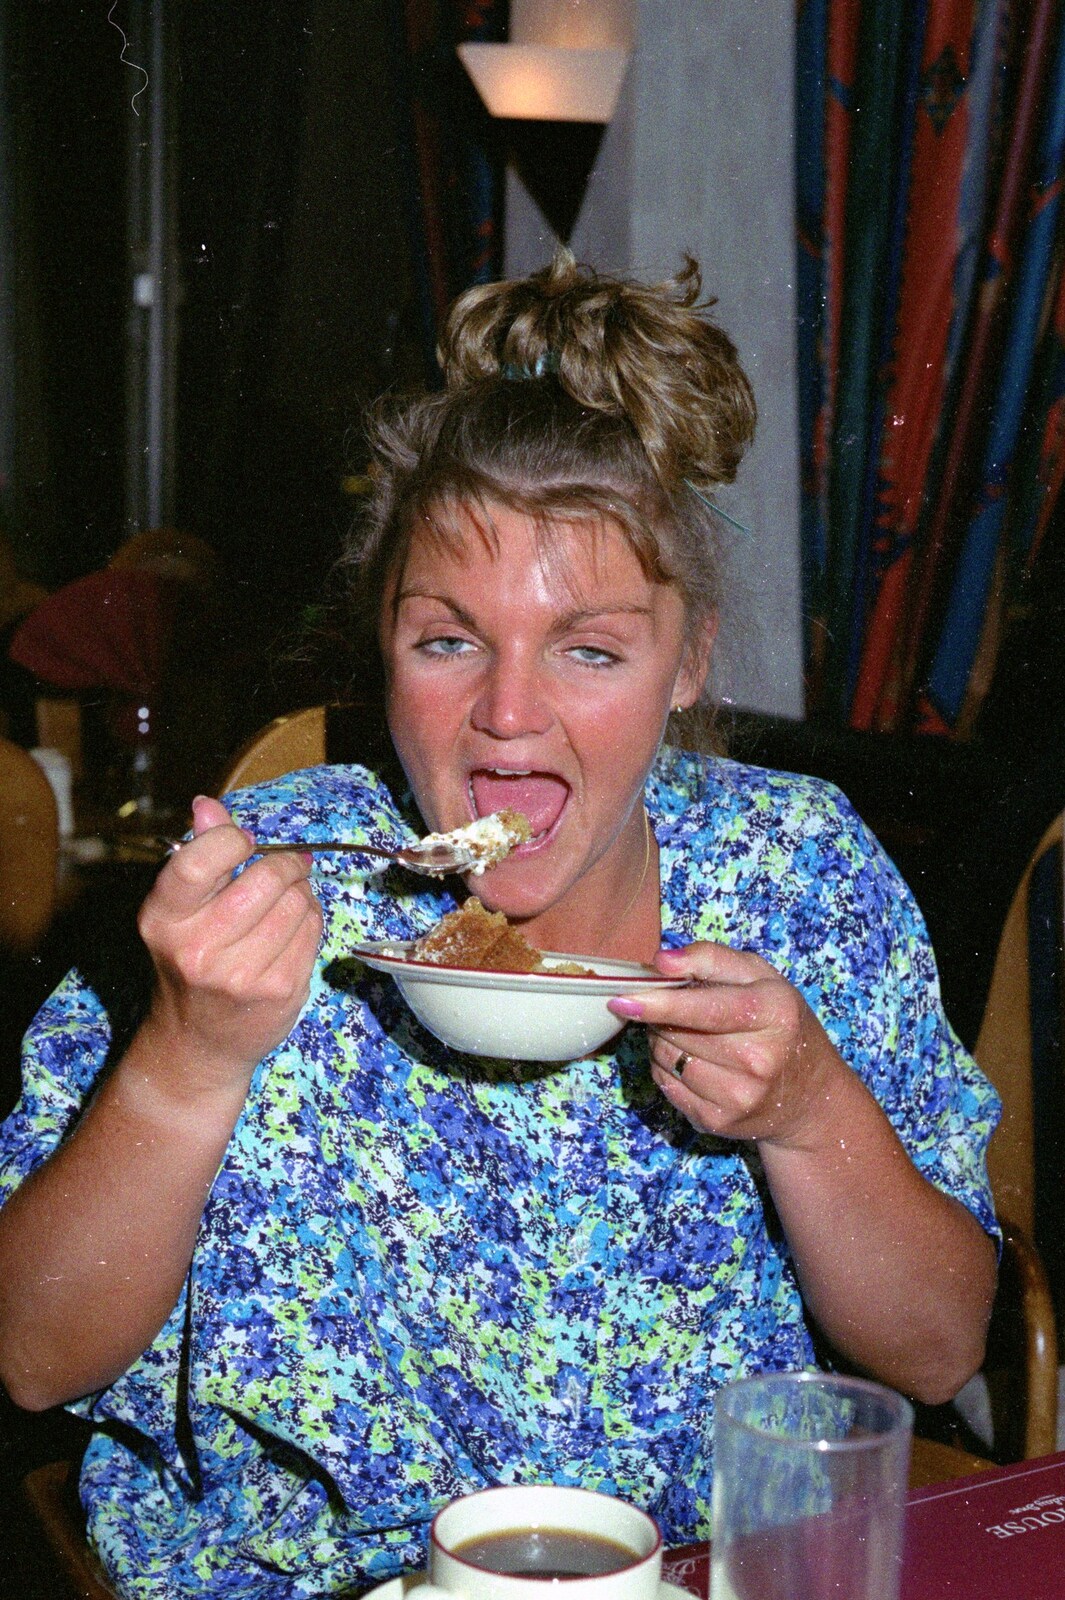 A non-flattering photo of Chantal eating from Chantal and Andy's Wedding, and the Lord Mayor's Parade, Plymouth - 20th May 1987